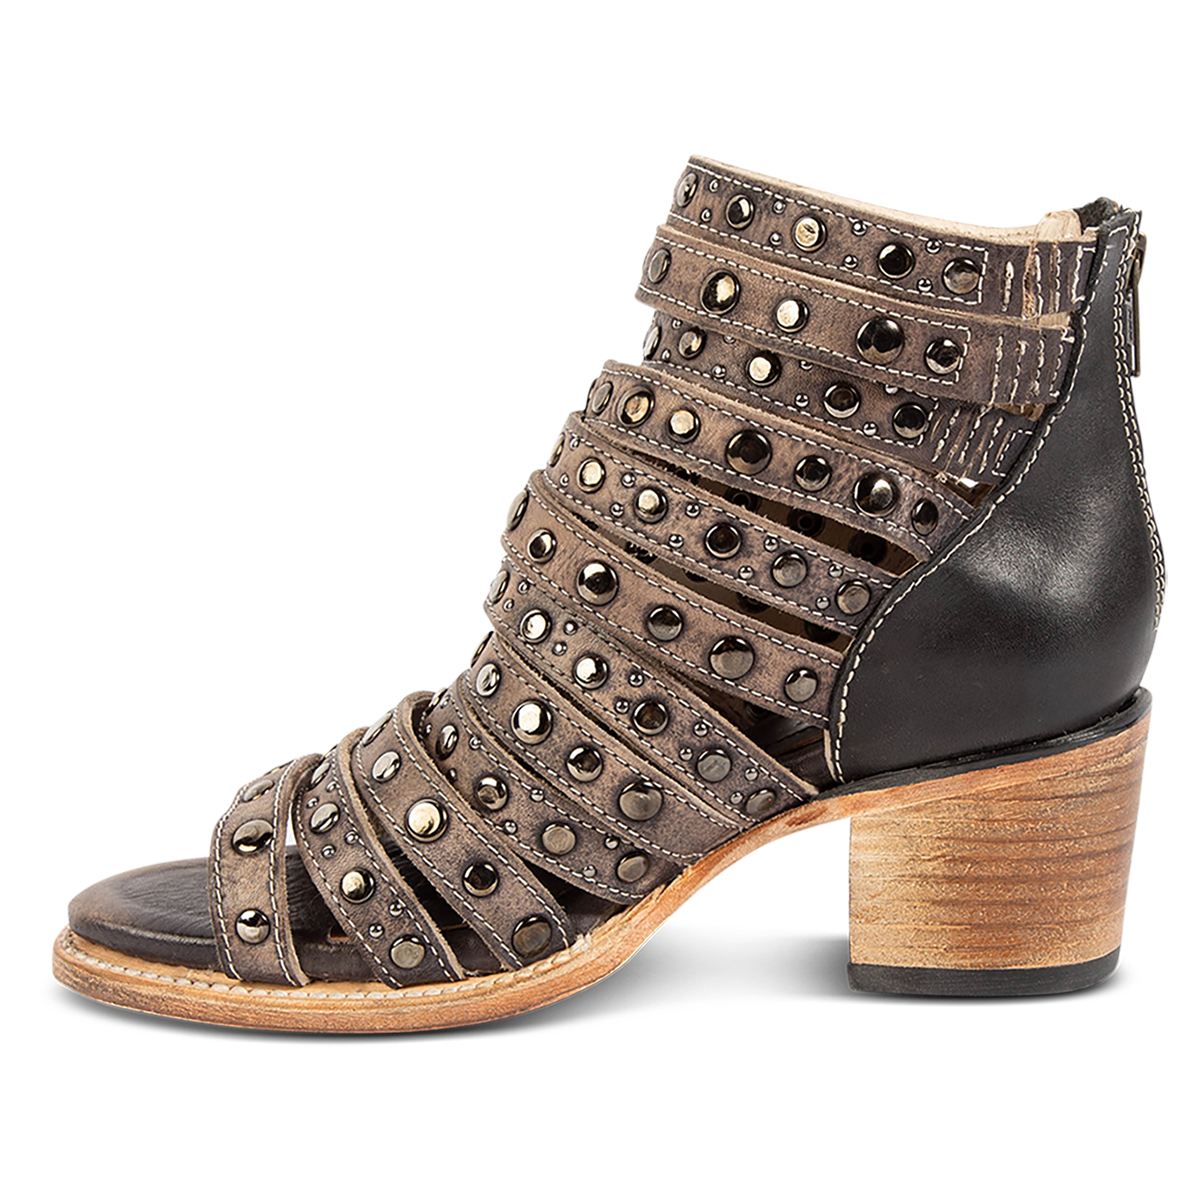 Inside view showing a stacked heel and embellished leather straps on FREEBIRD women's Cannes black distressed leather sandal